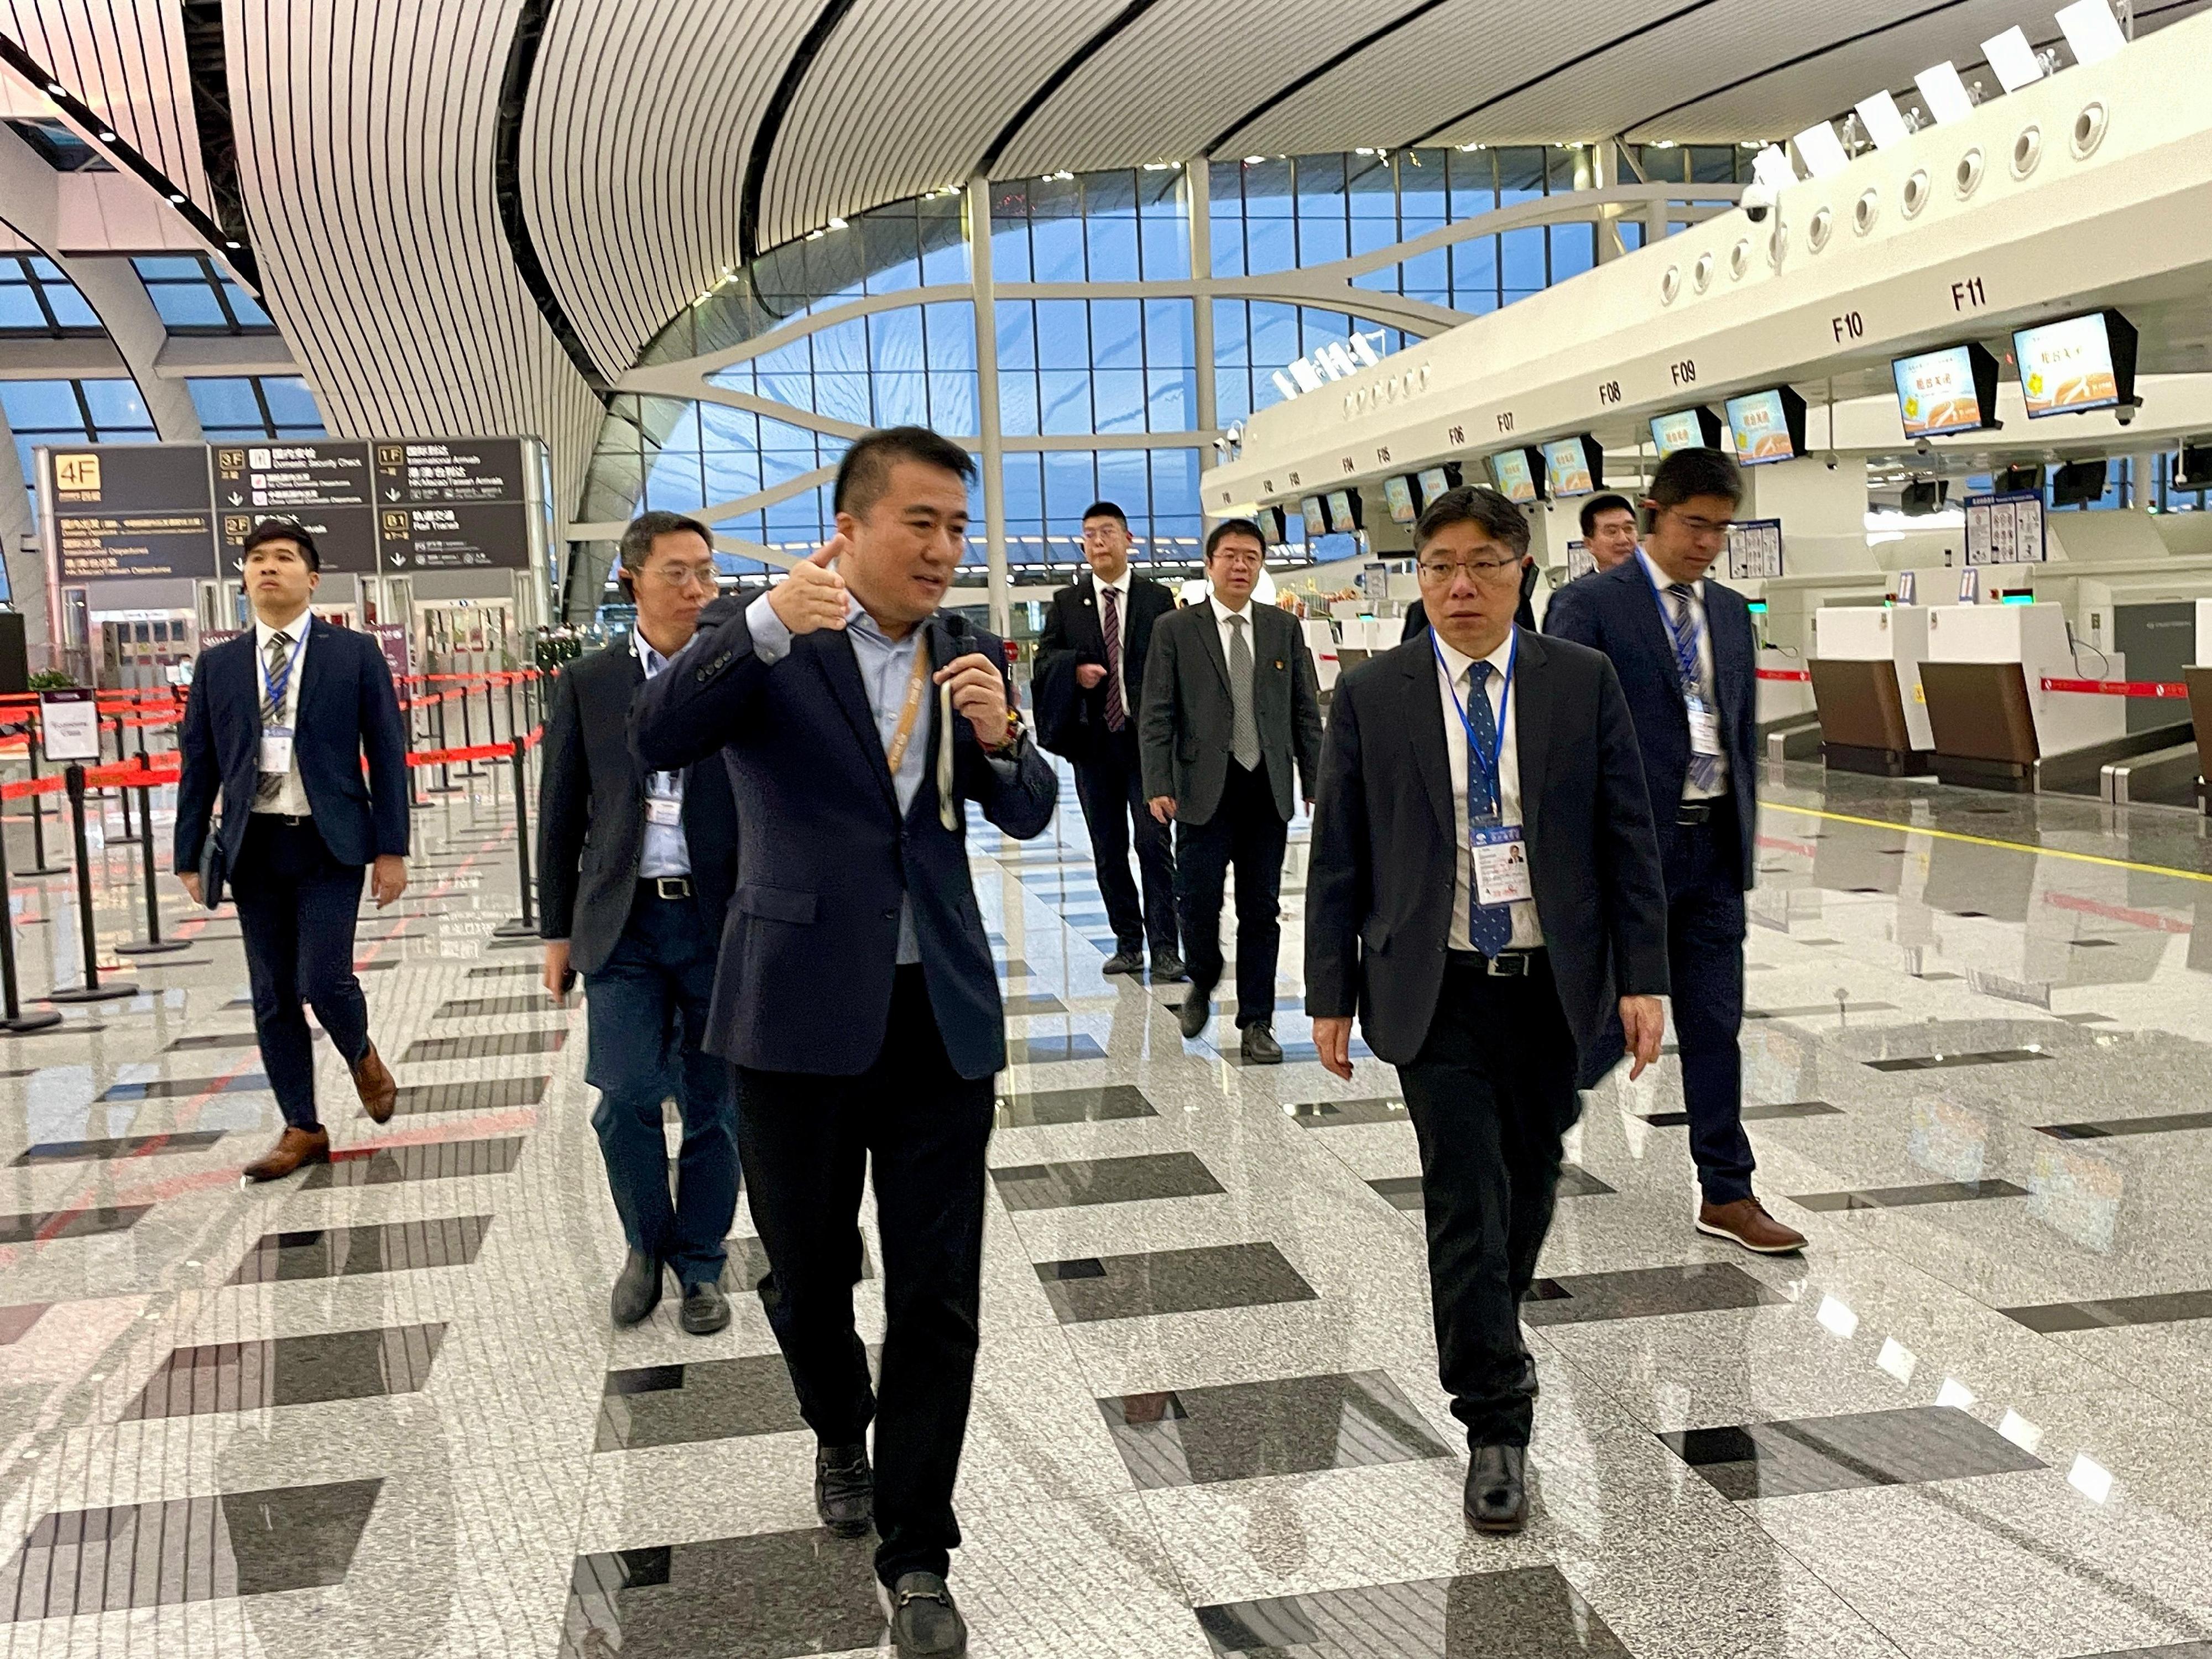 The Secretary for Transport and Logistics, Mr Lam Sai-hung, visited the terminal of Beijing Daxing International Airport yesterday (April 9). Photo shows Mr Lam (second right) receiving a briefing on the operation of the airport.